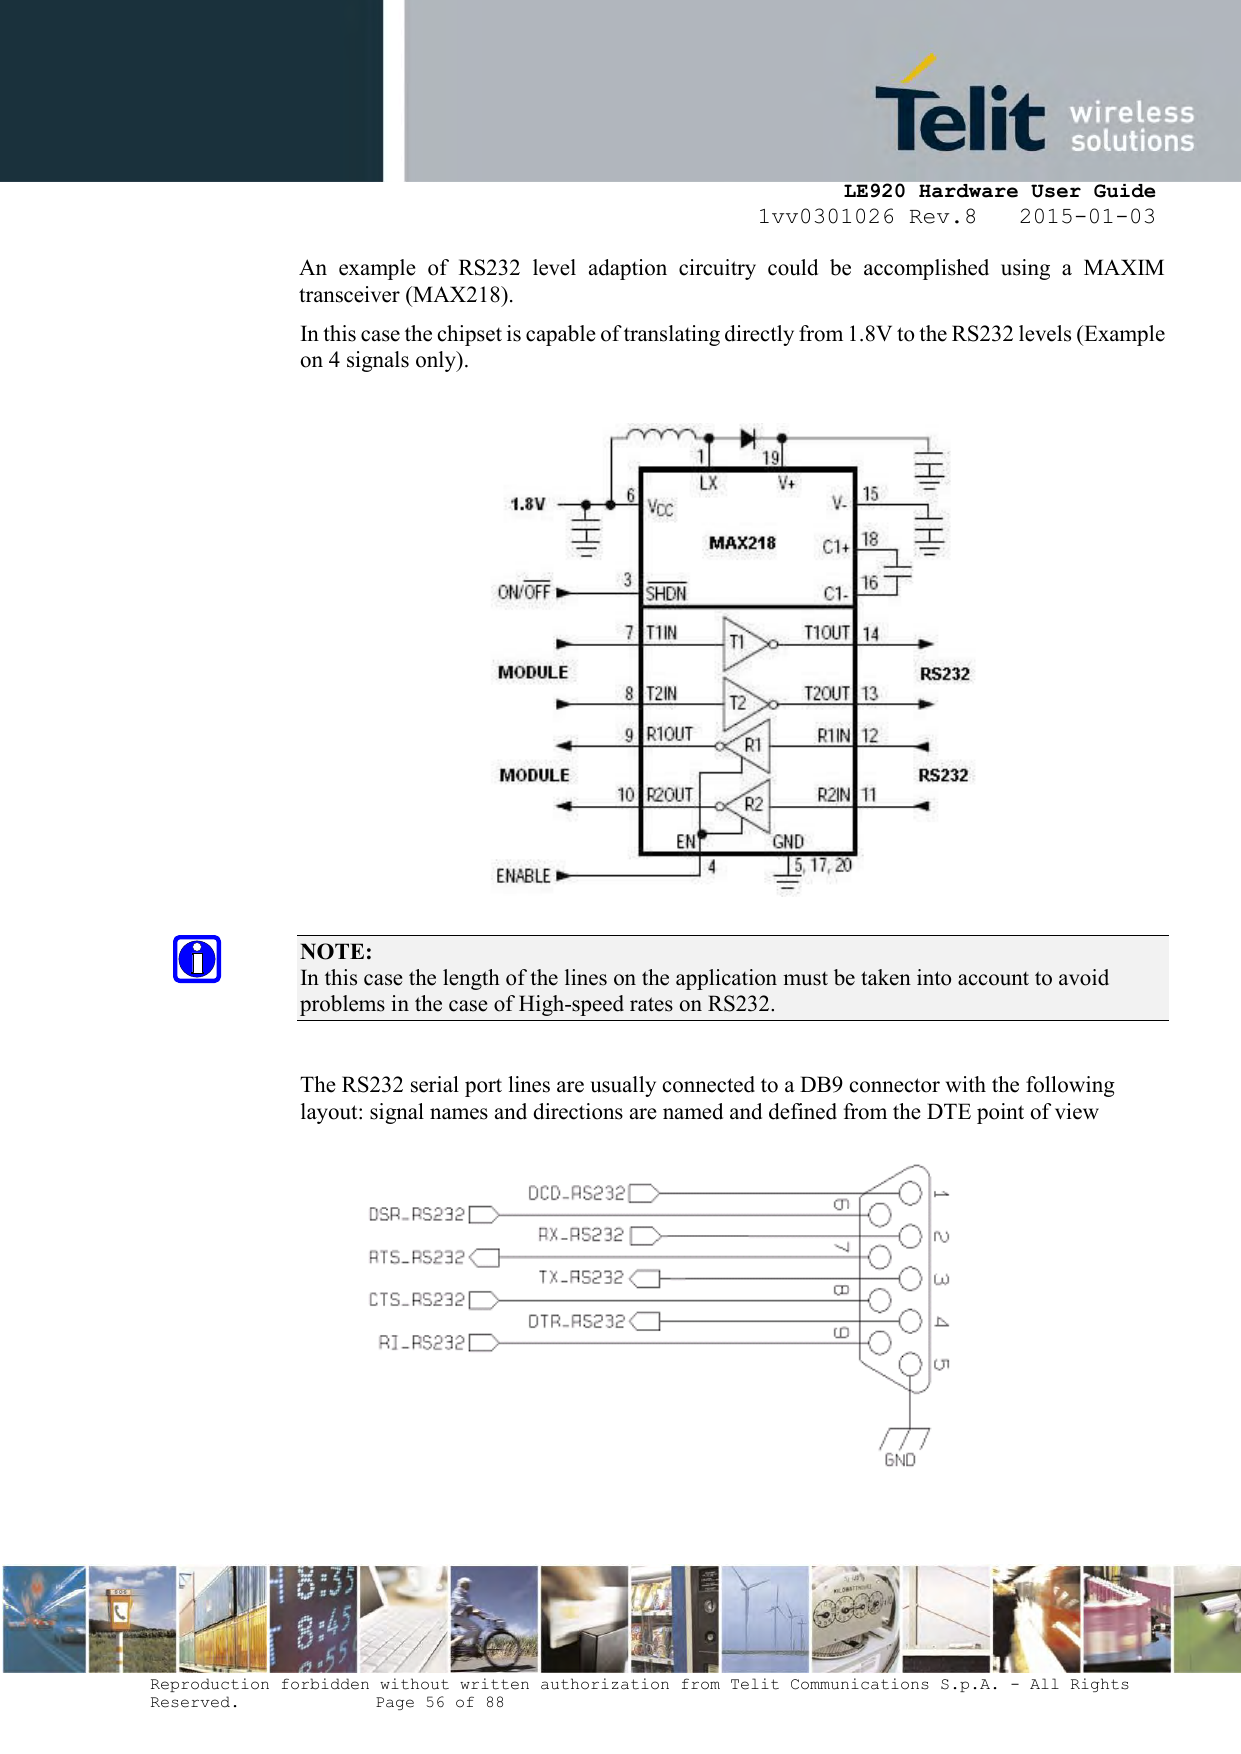     LE920 Hardware User Guide 1vv0301026 Rev.8   2015-01-03 Reproduction forbidden without written authorization from Telit Communications S.p.A. - All Rights Reserved.    Page 56 of 88  An  example  of  RS232  level  adaption  circuitry  could  be  accomplished  using  a  MAXIM transceiver (MAX218).  In this case the chipset is capable of translating directly from 1.8V to the RS232 levels (Example on 4 signals only).    NOTE:  In this case the length of the lines on the application must be taken into account to avoid problems in the case of High-speed rates on RS232.  The RS232 serial port lines are usually connected to a DB9 connector with the following layout: signal names and directions are named and defined from the DTE point of view    